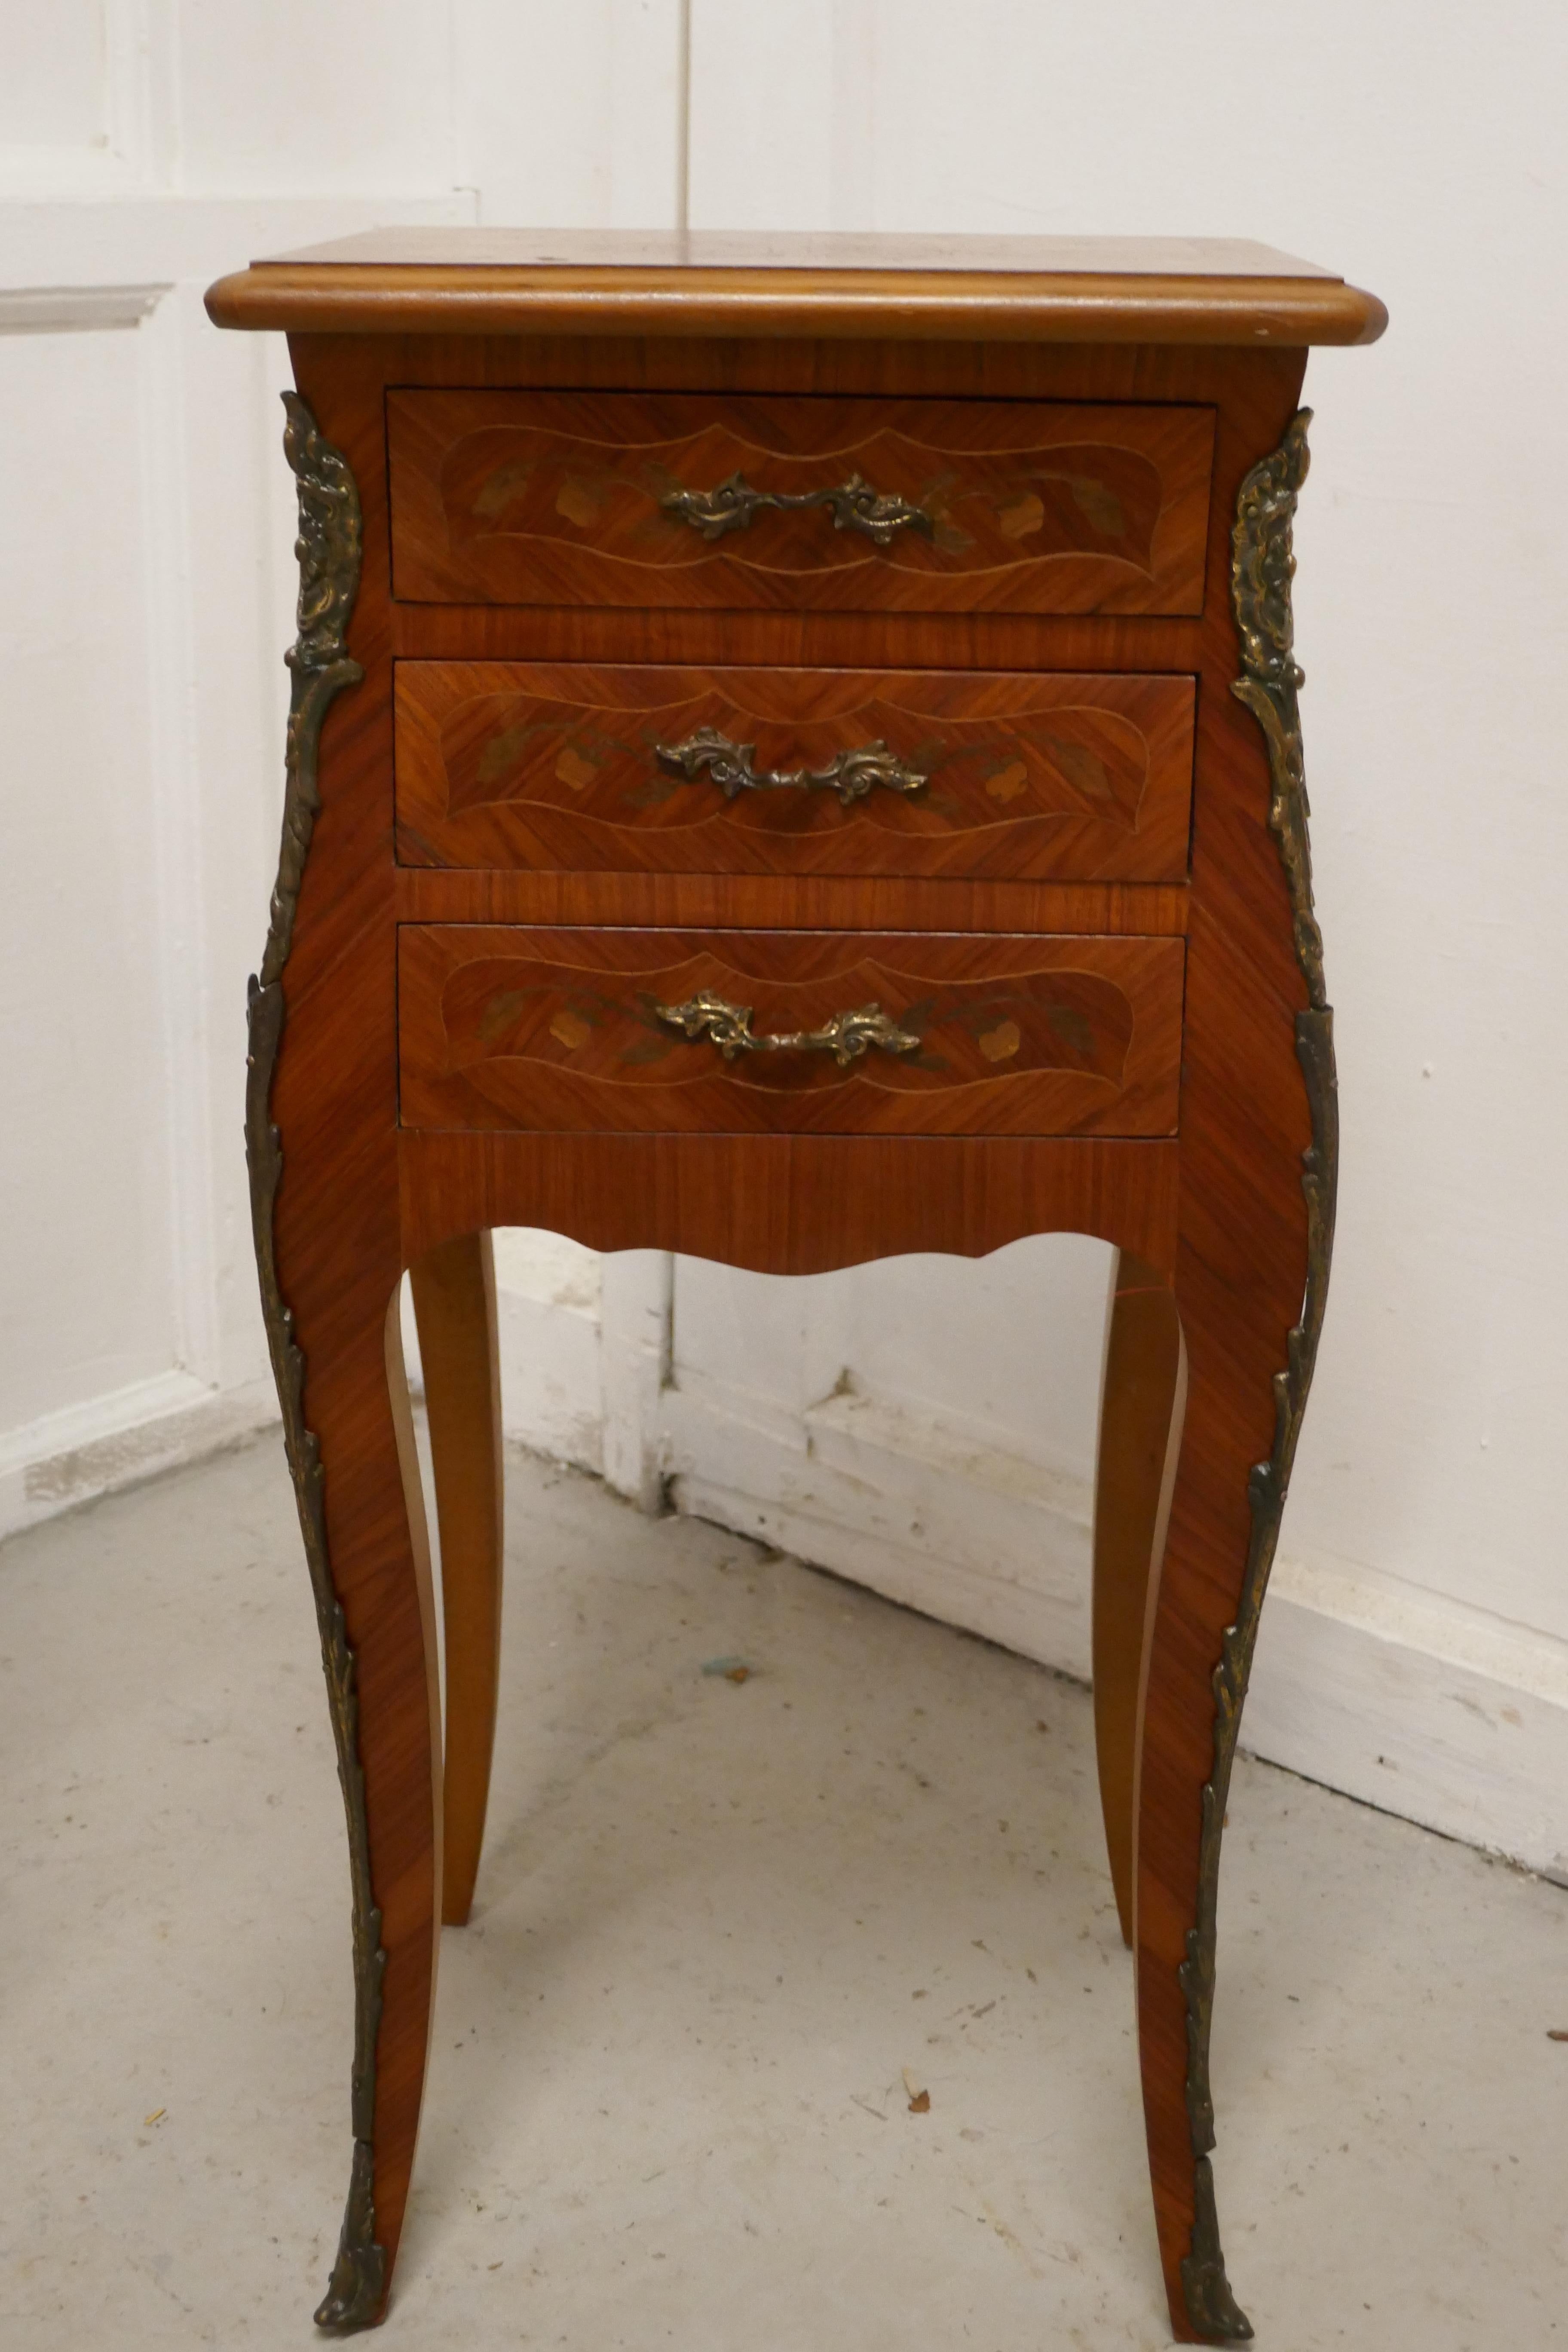 A pair of inlaid French Marquetry bombe shaped bedside cupboards

These are a pair of French Louis XVI style Marquetry bedside tables, the cabinets are beautifully inlaid in a wonderful variety of woods
The chests have a serpentine shaped front